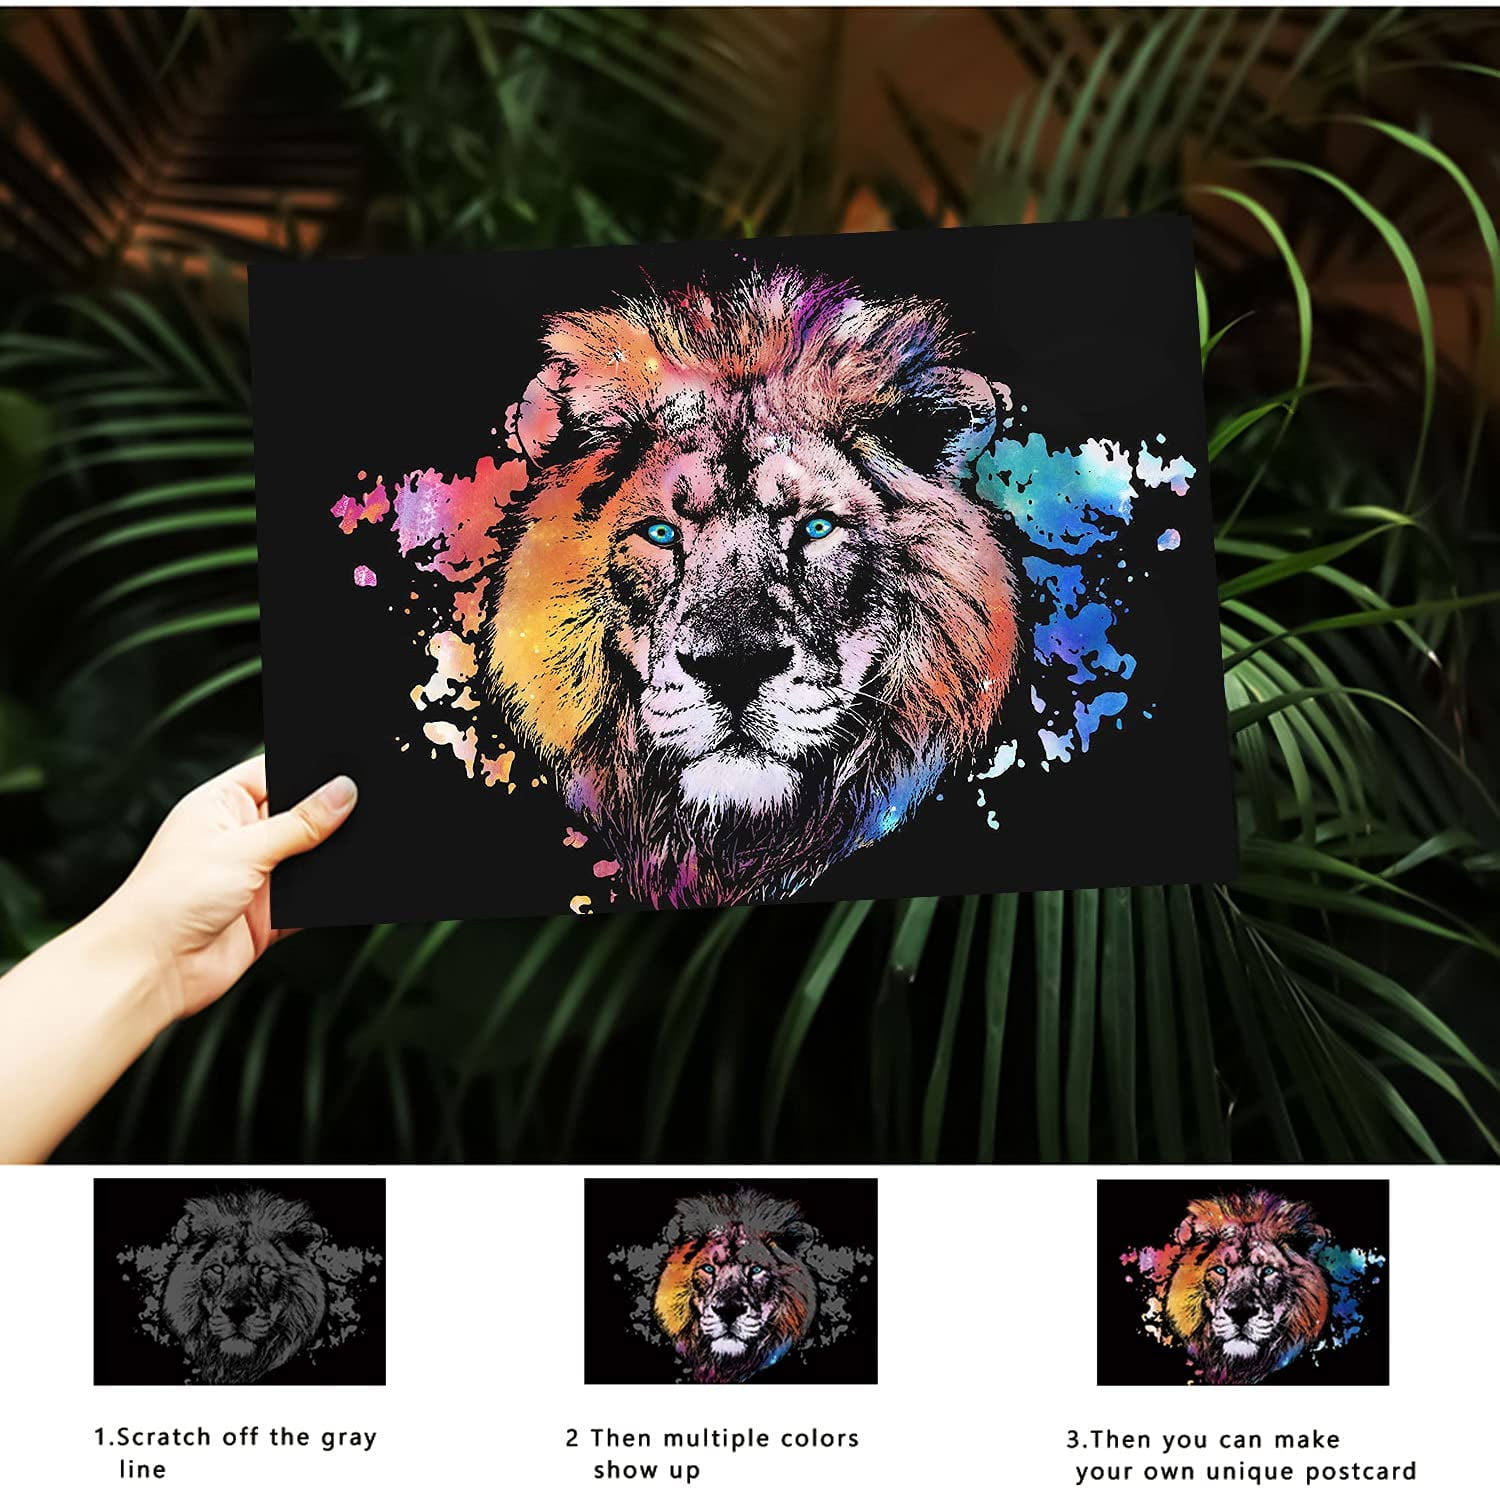 Scratch Art Rainbow Painting Paper DIY Crafts Womens Hobbies Engraving Art for Adult & Children Scratchboard Scratch Painting Sketch Pads Birthday Gift 16 x 11.2 inch Elephant Animal 